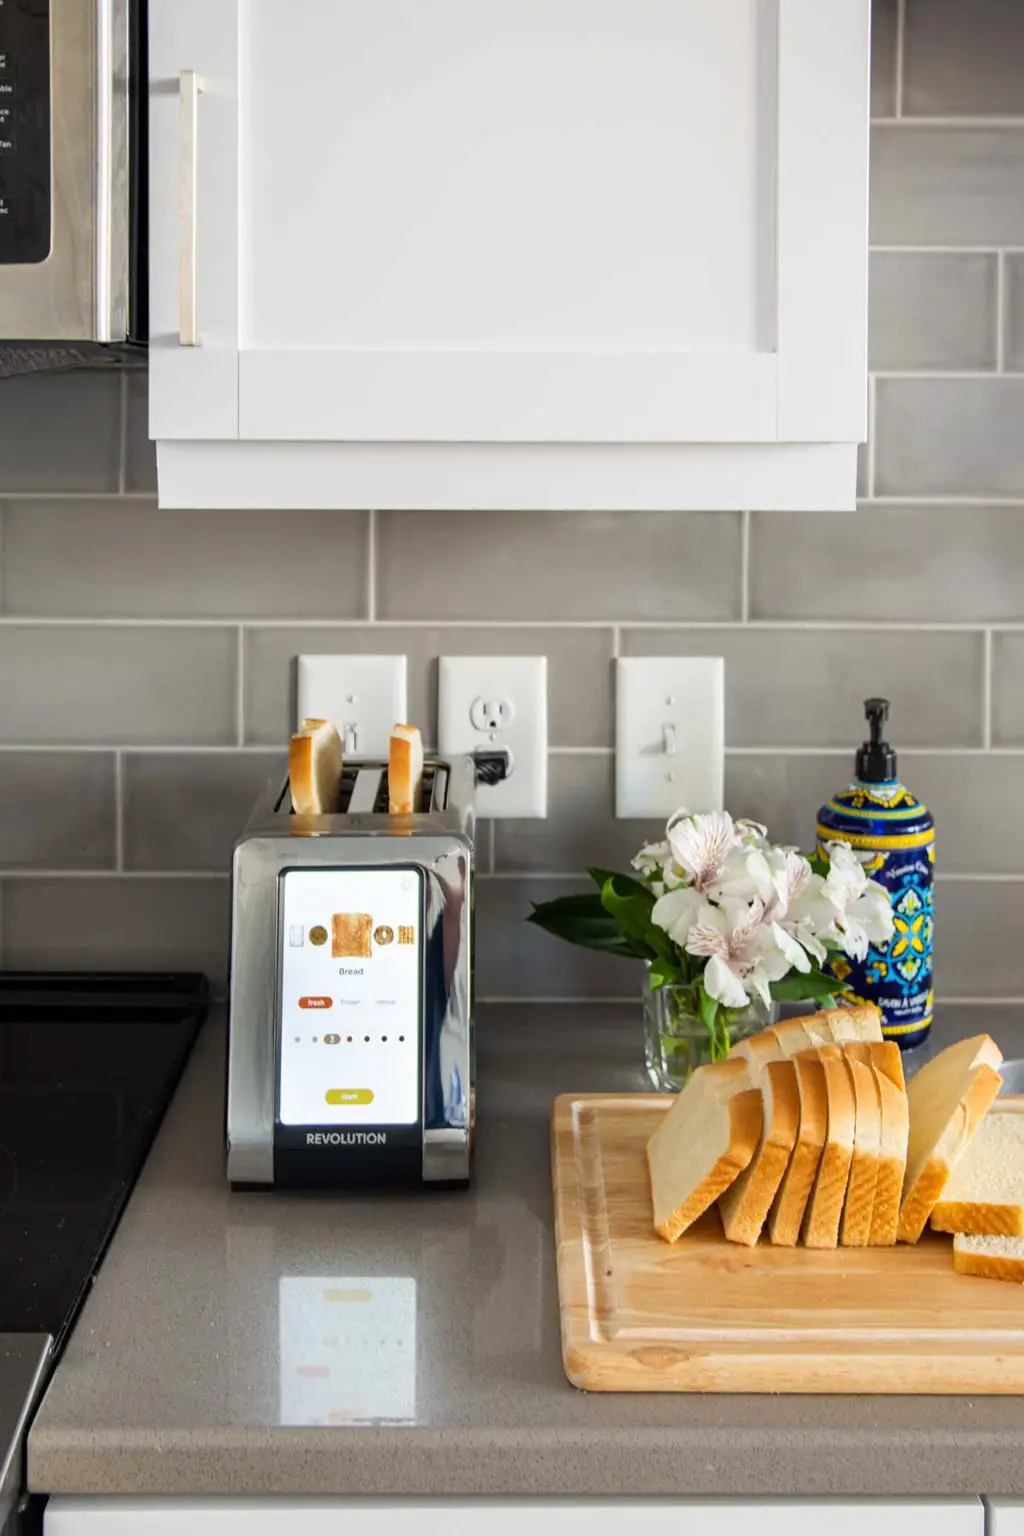 Revolution Cooking Smart-Toaster Review